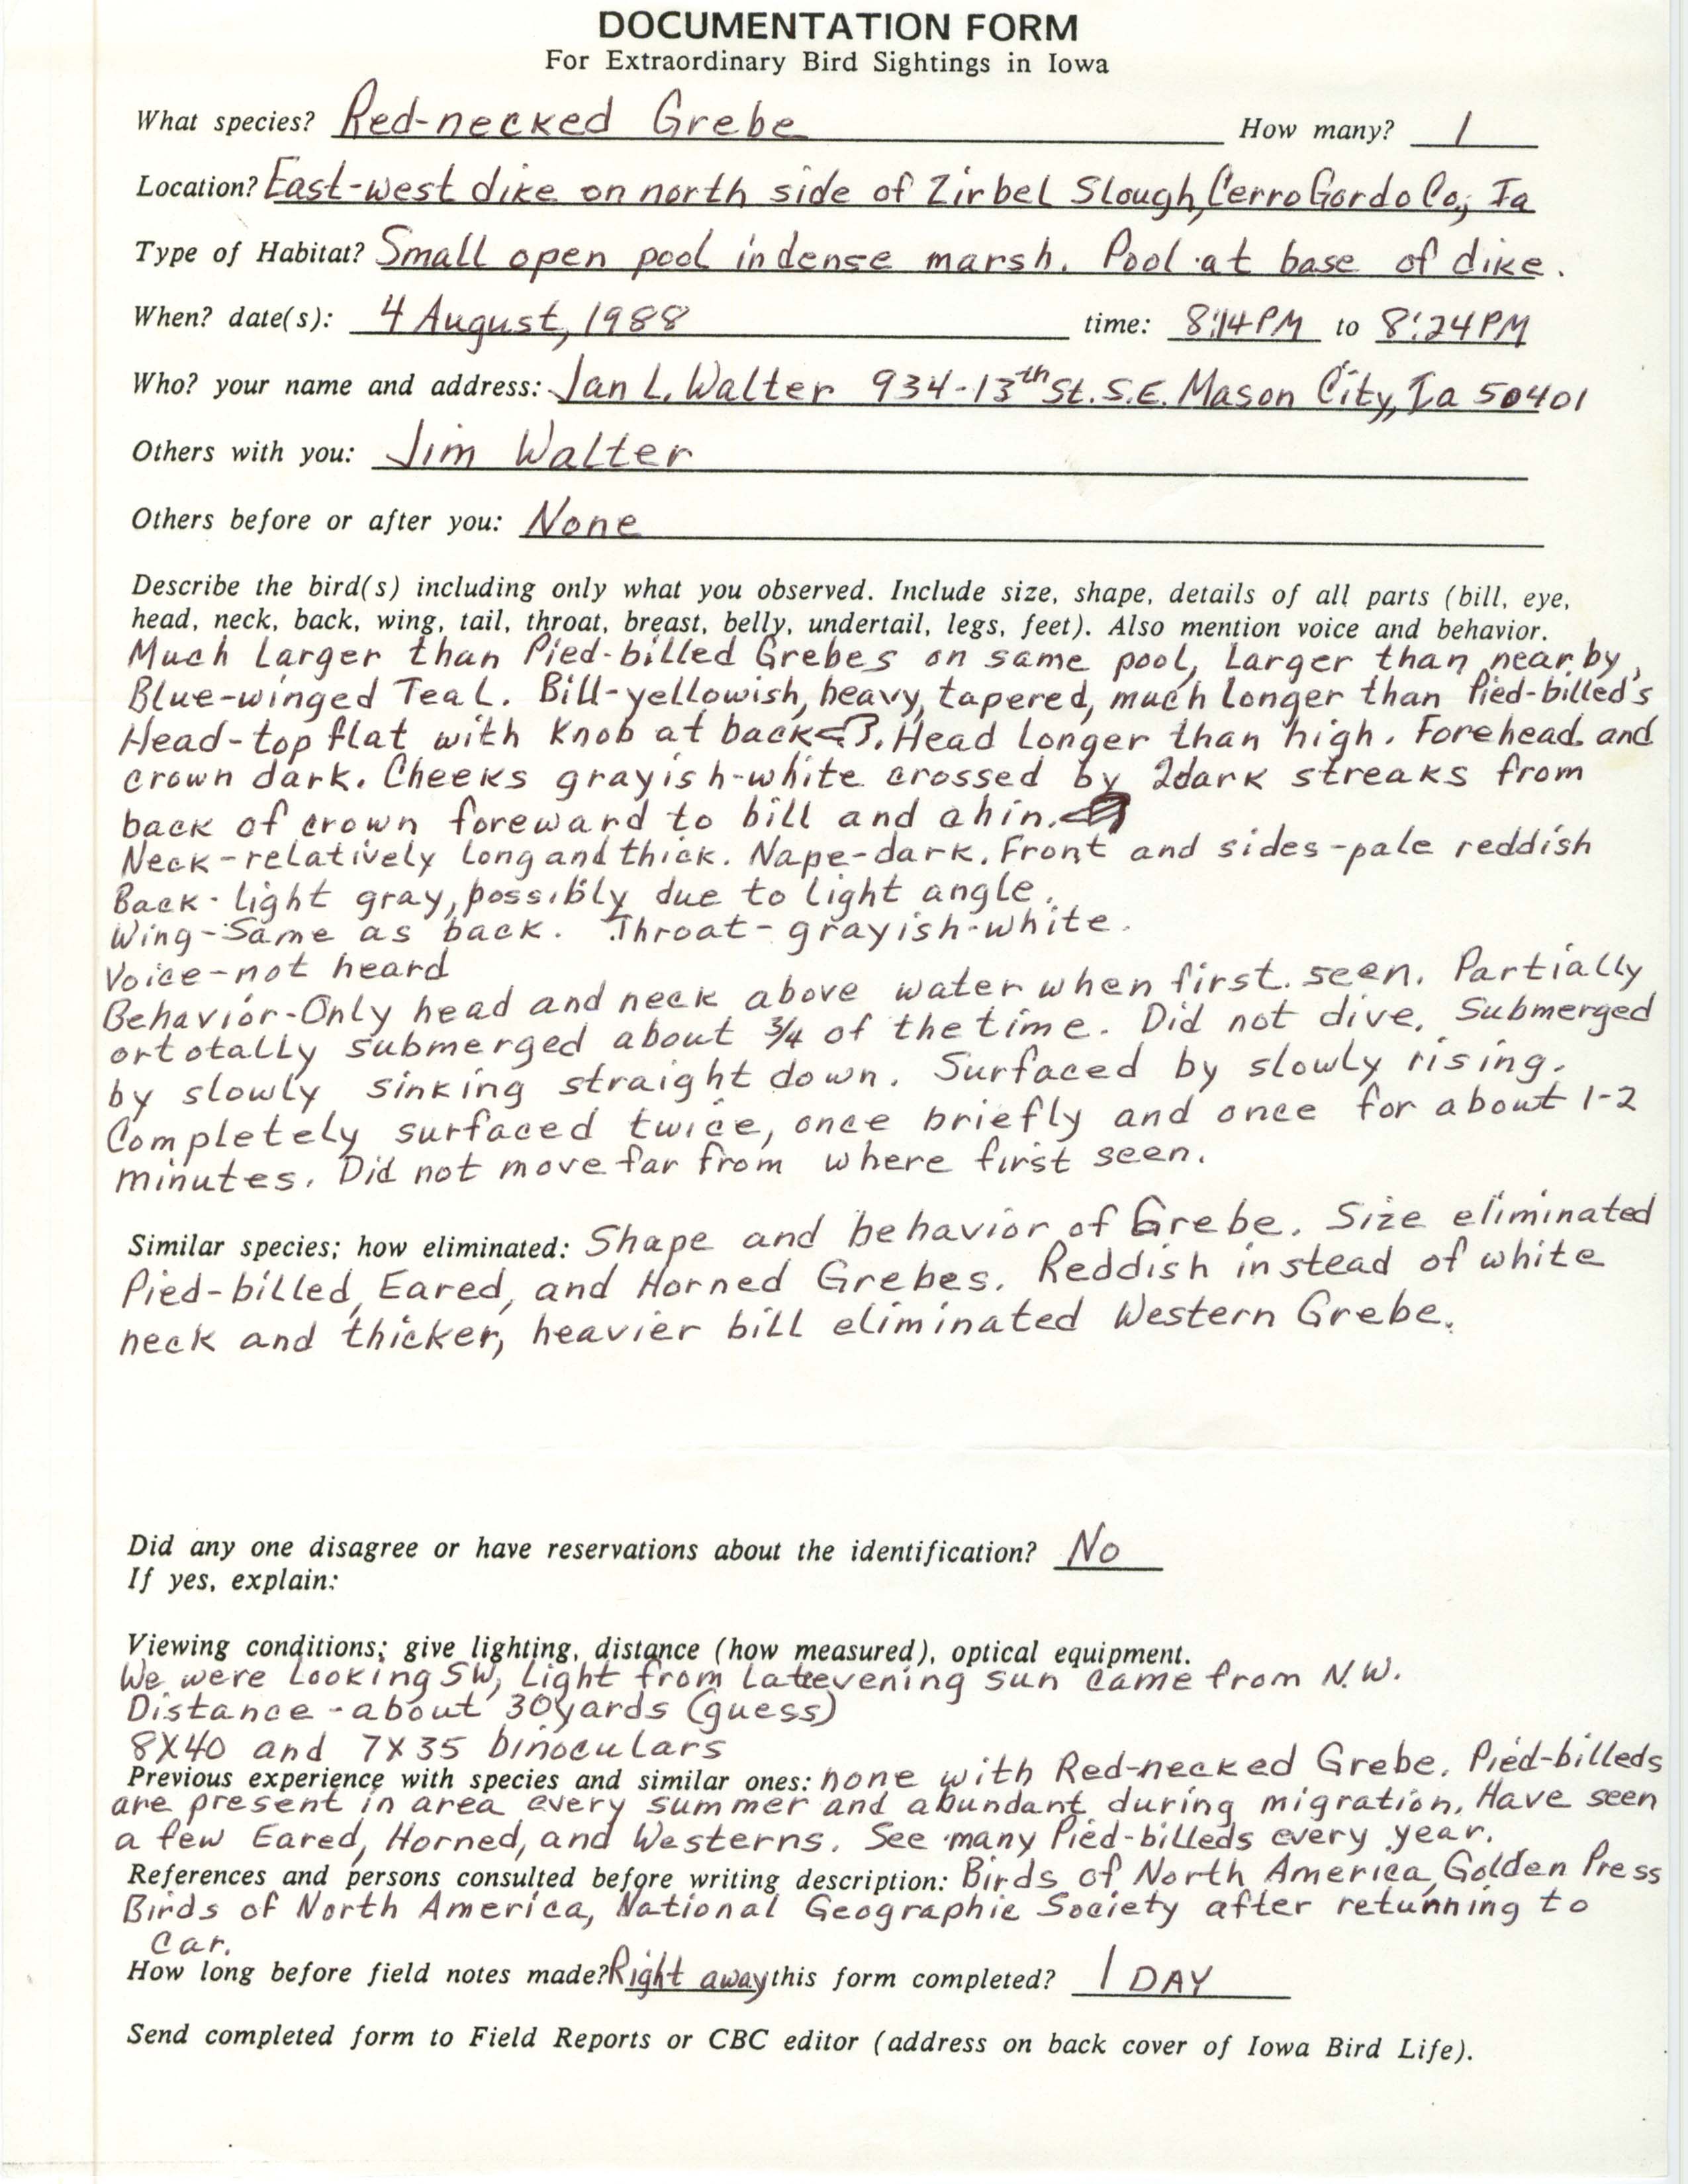 Rare bird documentation form for Red-necked Grebe at Zirbel Slough, 1988